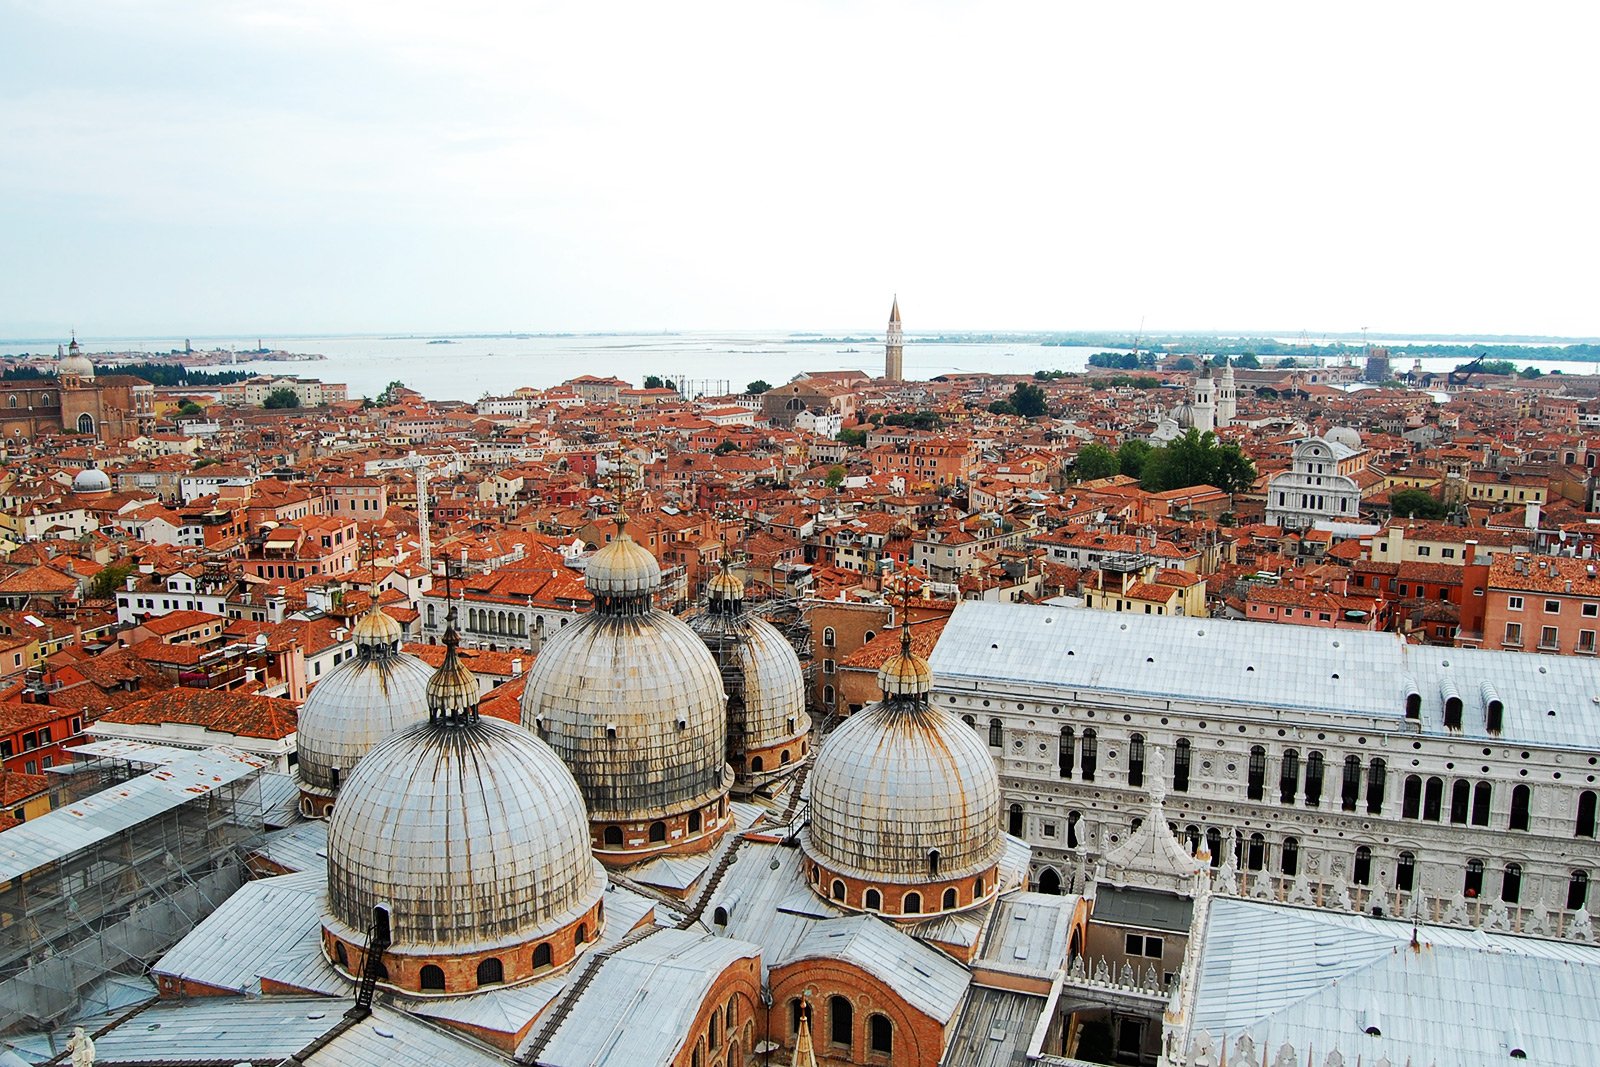 How to climb the Campanile of the St. Mark's Basilica in Venice